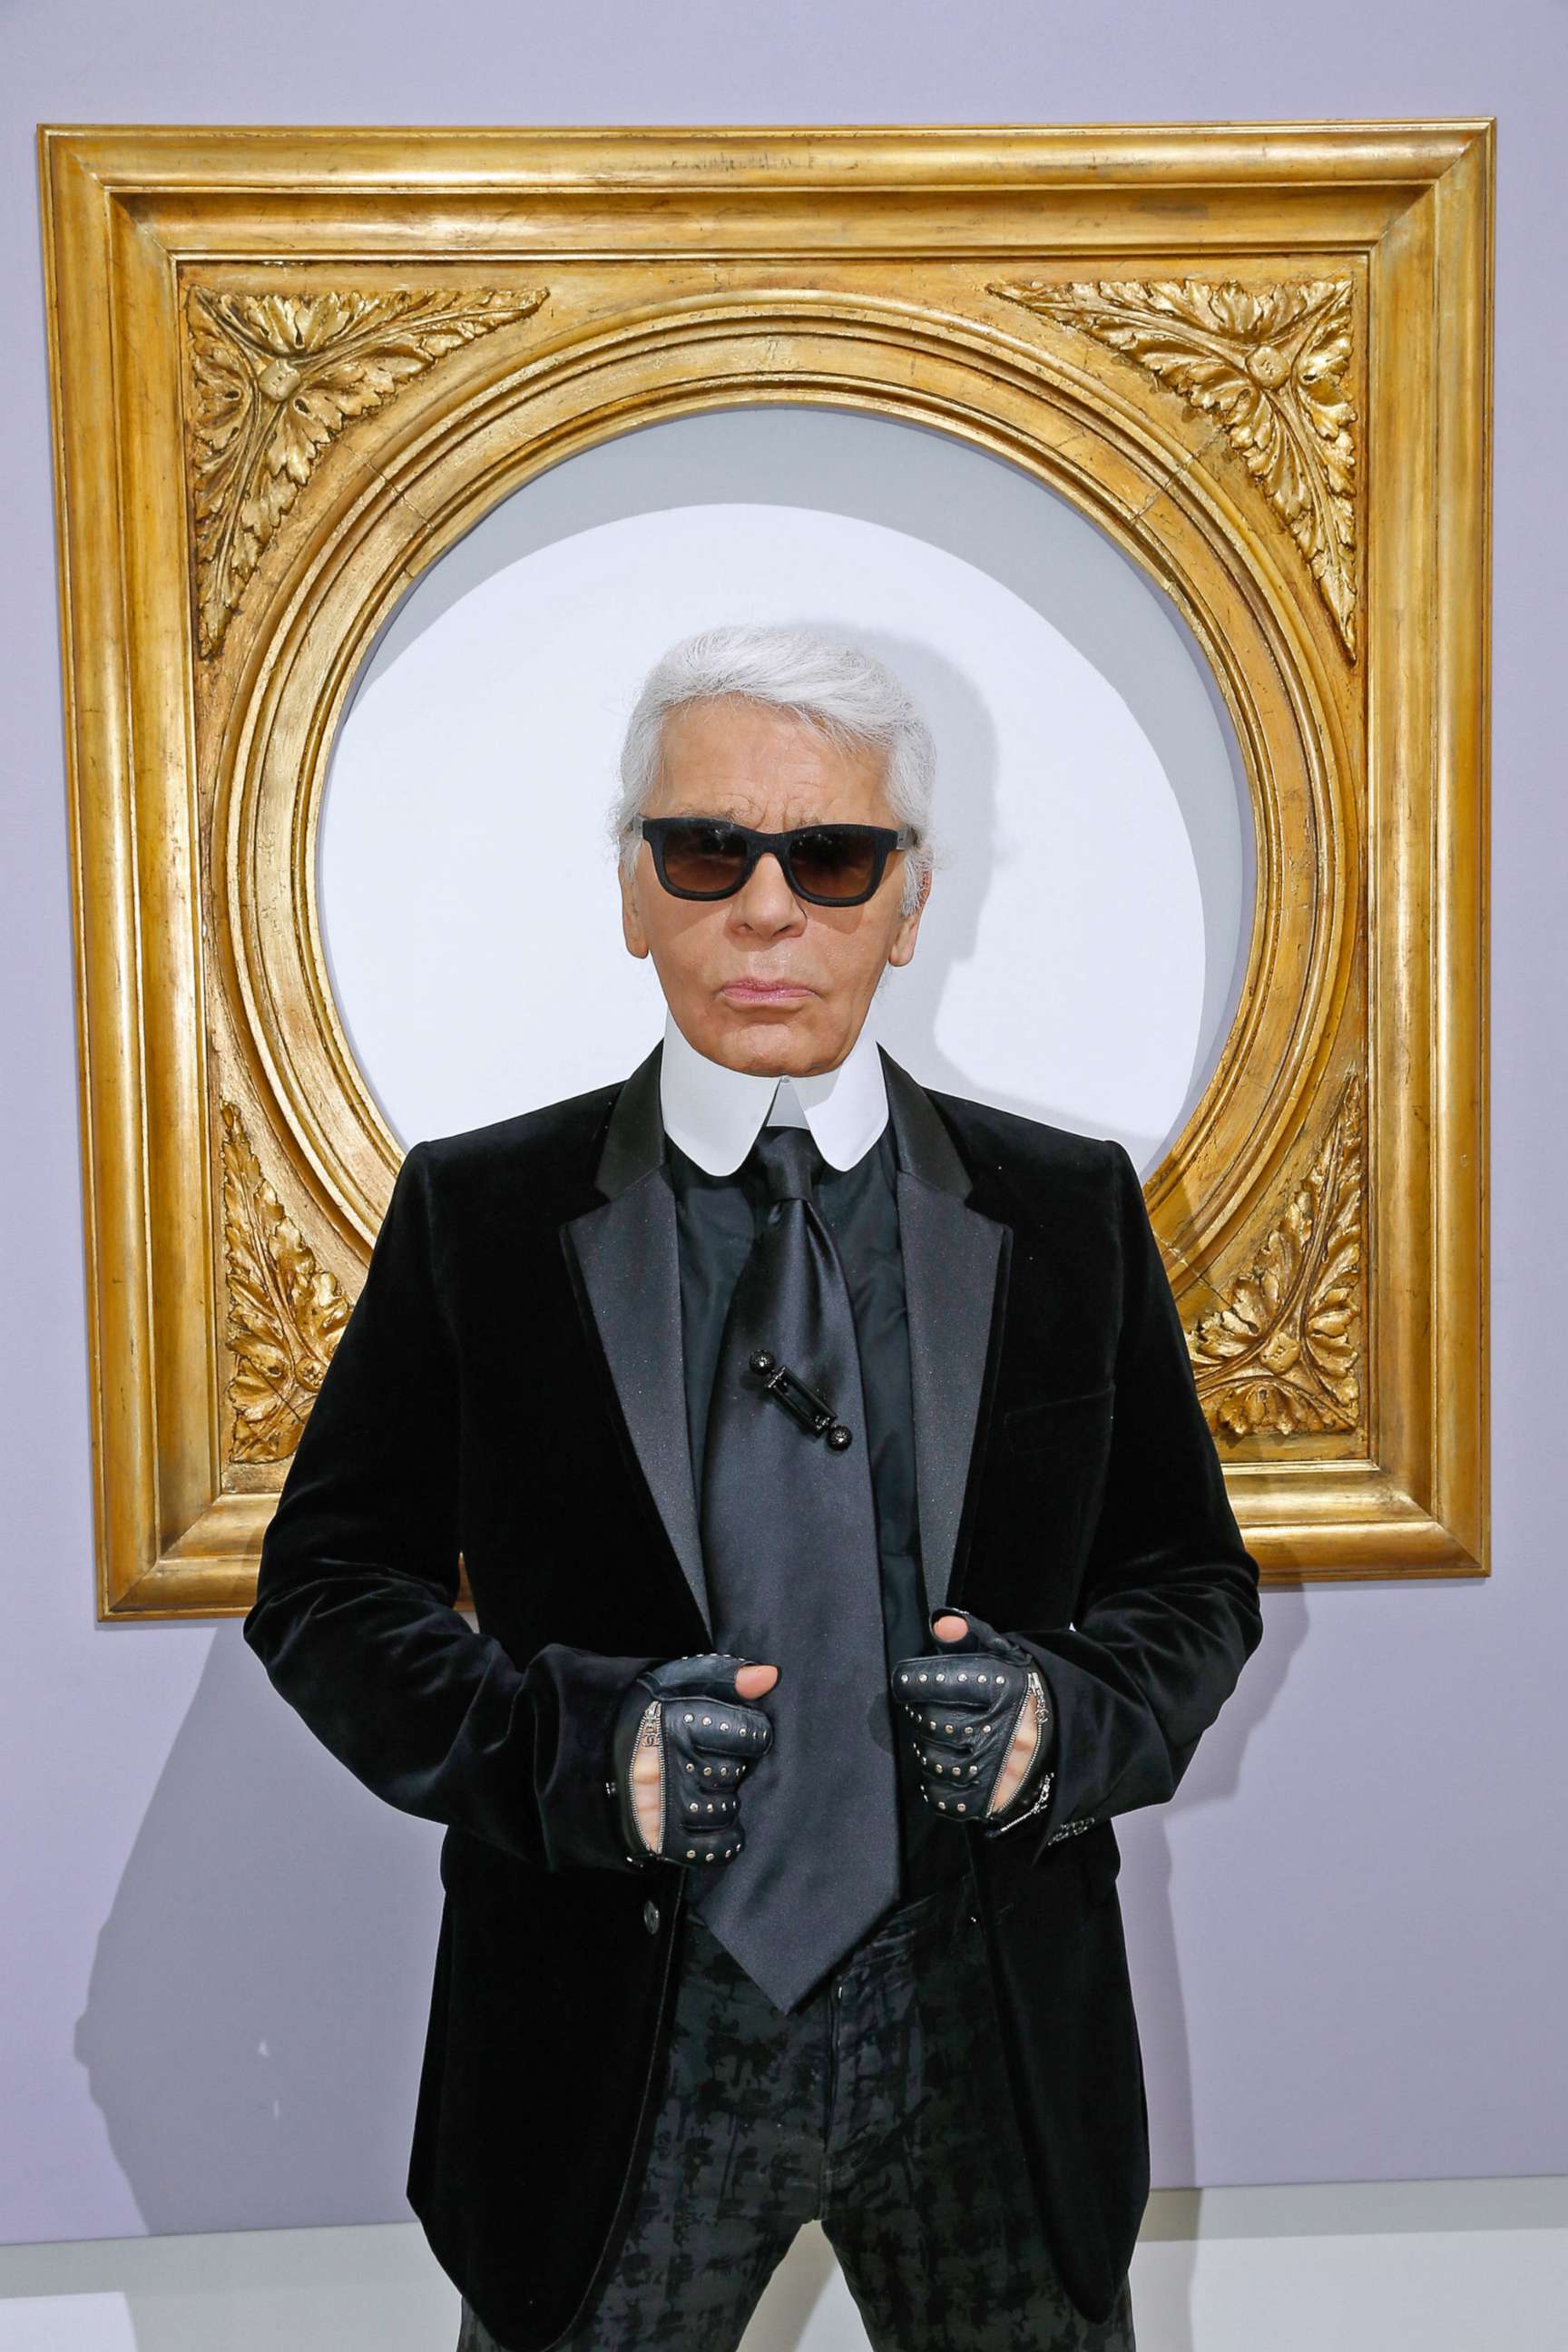 PHOTO: Karl Lagerfeld attends the Chanel show during the Paris Fashion Week Women's wear Spring/Summer 2014, on Oct. 1, 2013 in Paris.